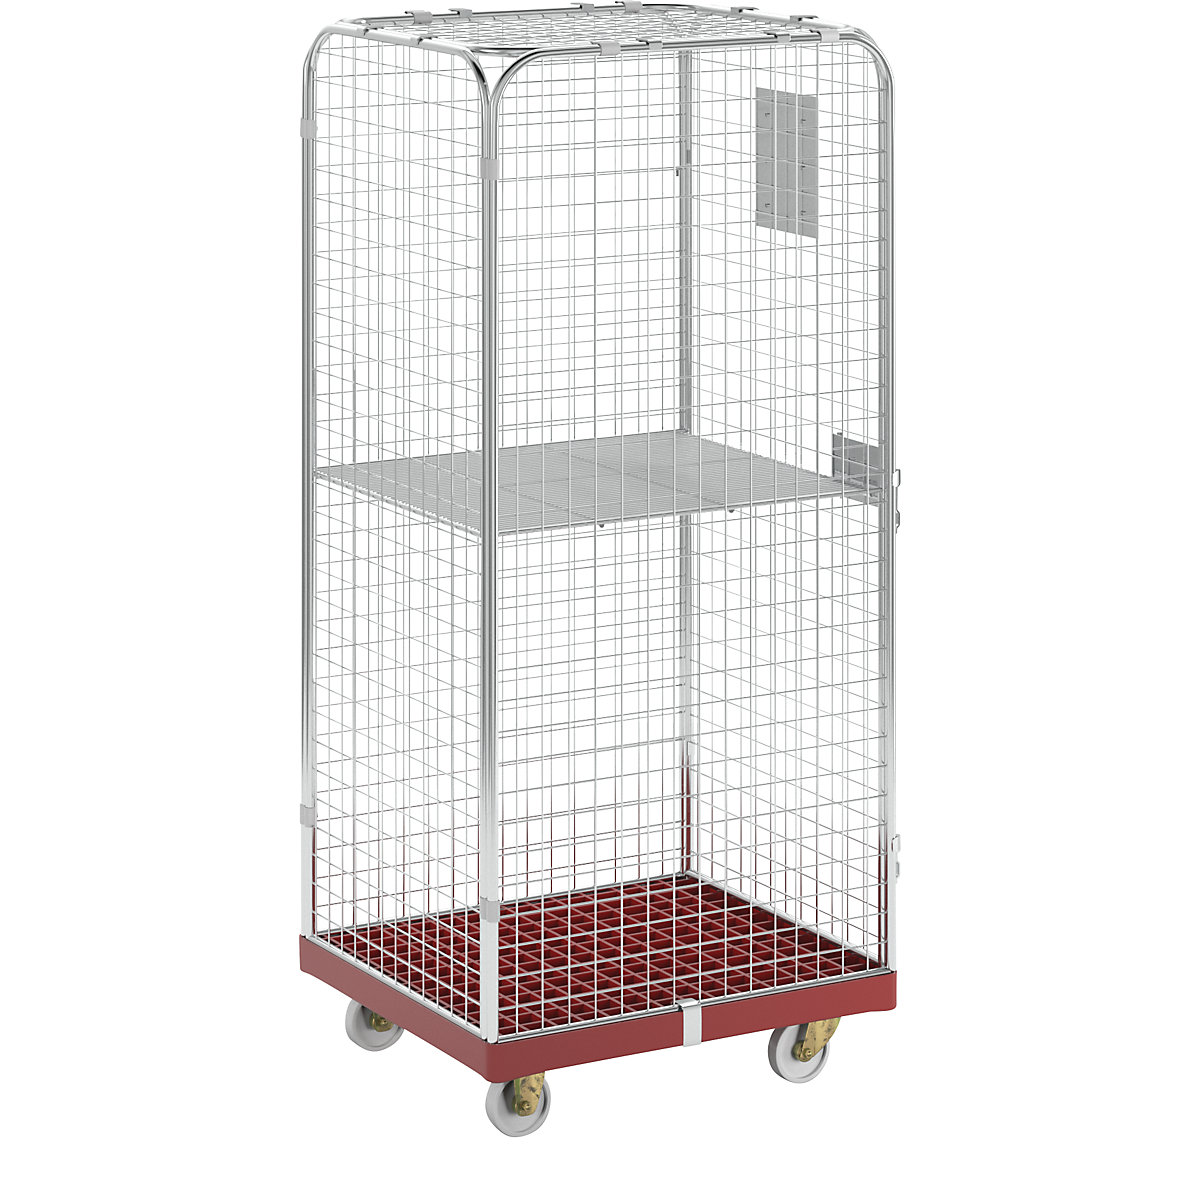 SAFE roll container, HxWxD 1800 x 720 x 810 mm, red transport dolly-1